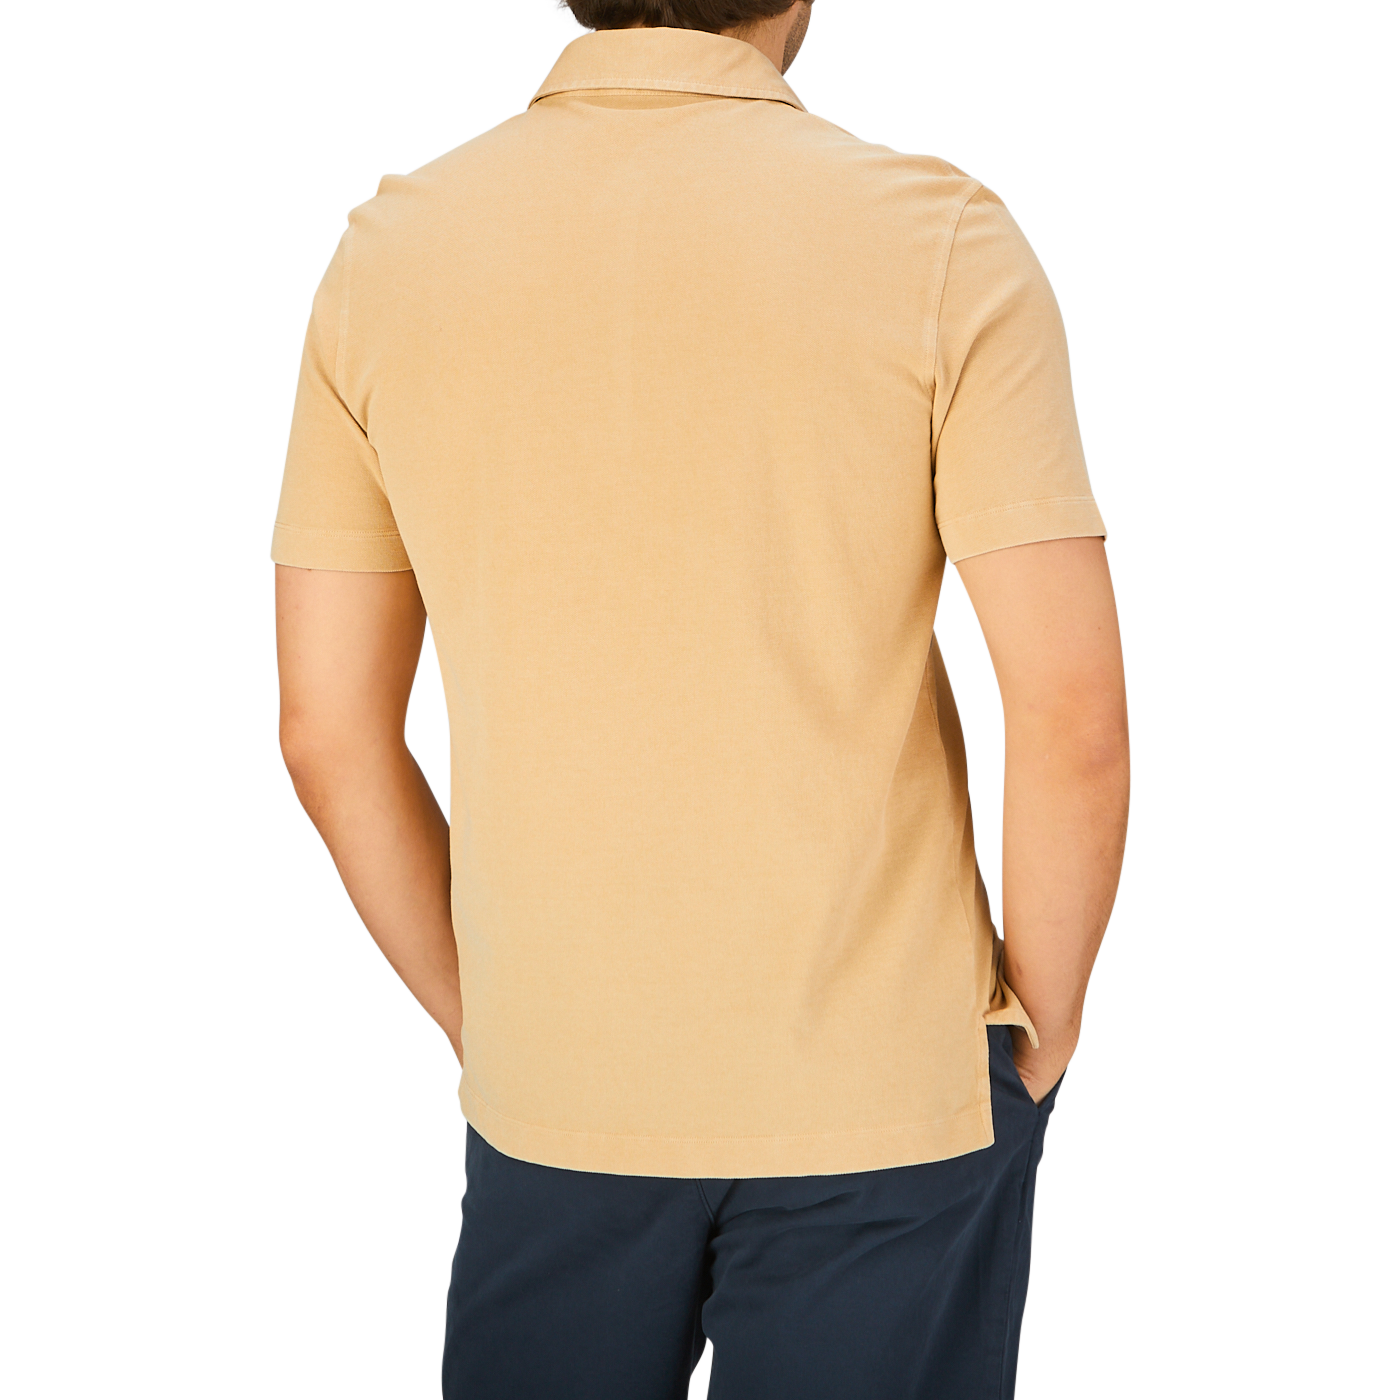 Rear view of a person wearing a Cappuccino Beige Cotton Piquet Drumohr slim fit polo shirt and dark trousers.